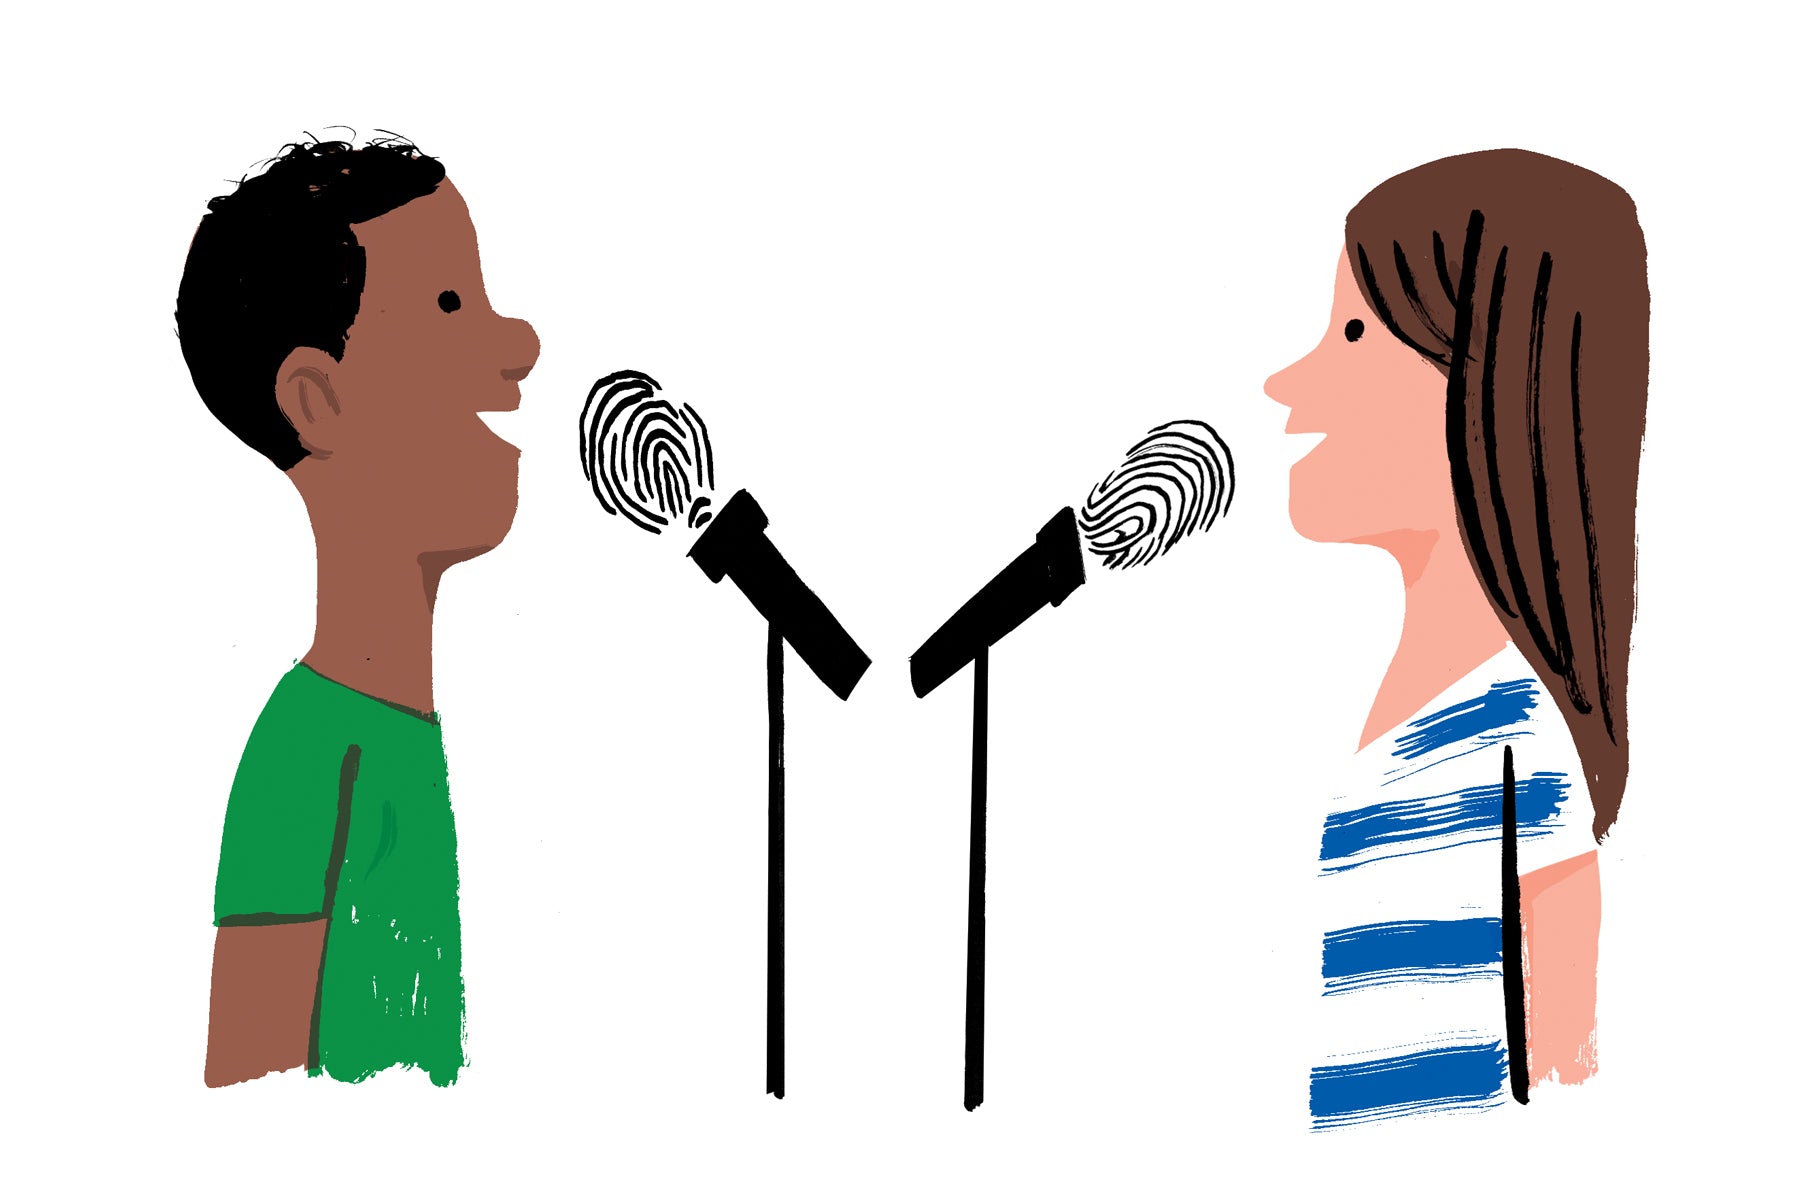 Illustration of two children, one black boy and one caucasian girl, speaking into a microphone but the microphone is a fingerprint. This is a metaphor for their individuality as they are introducing themselves. 